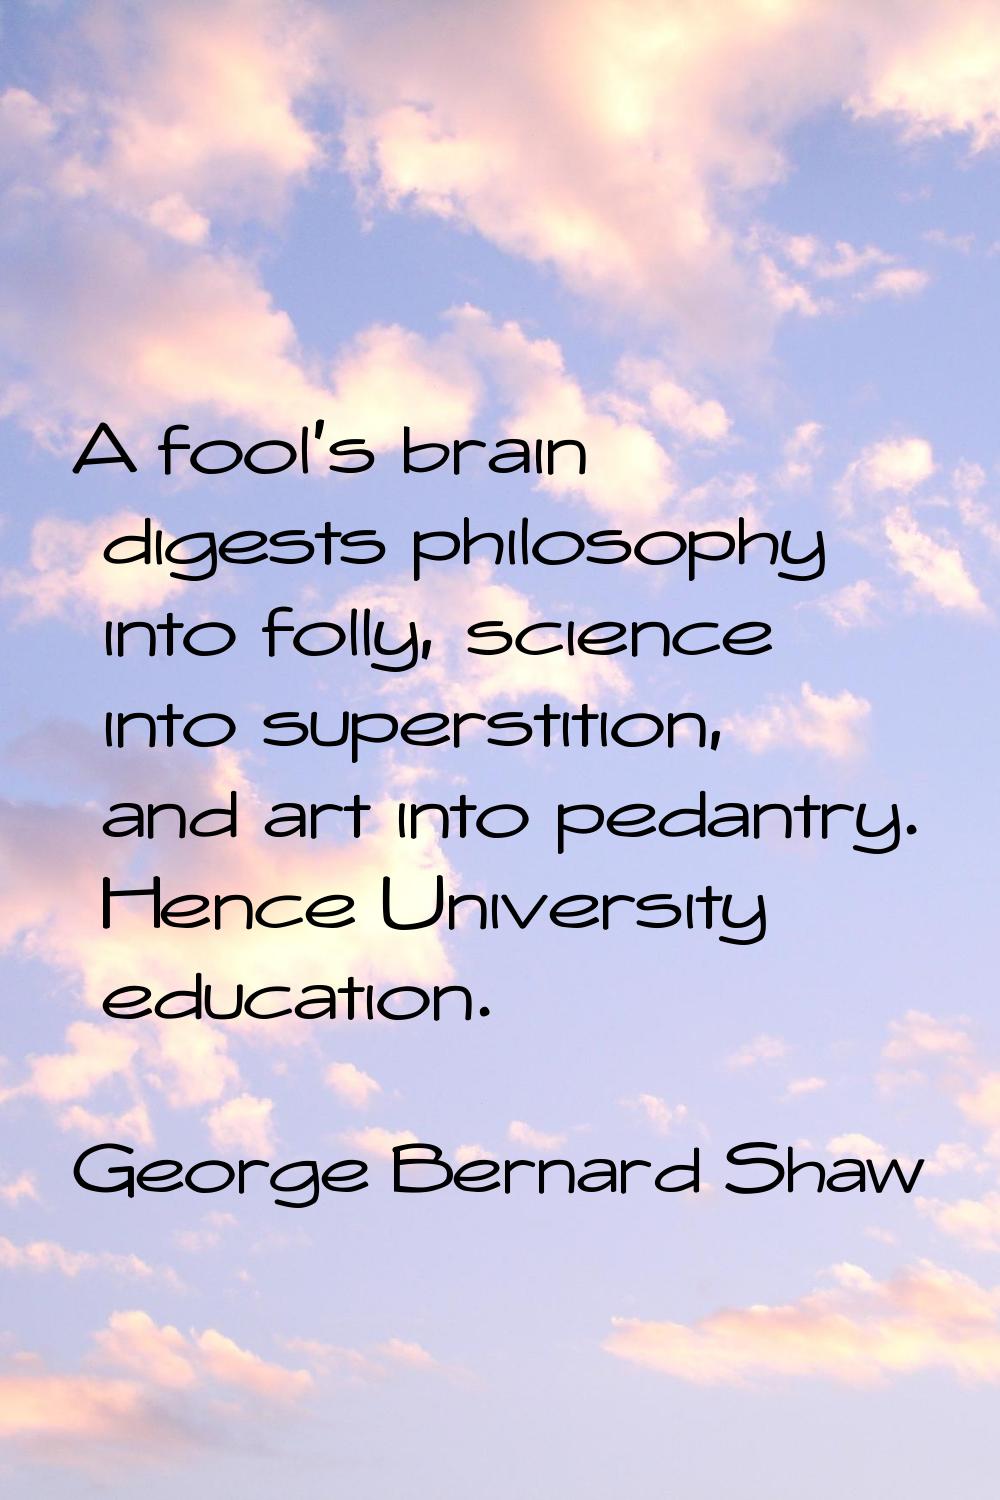 A fool's brain digests philosophy into folly, science into superstition, and art into pedantry. Hen